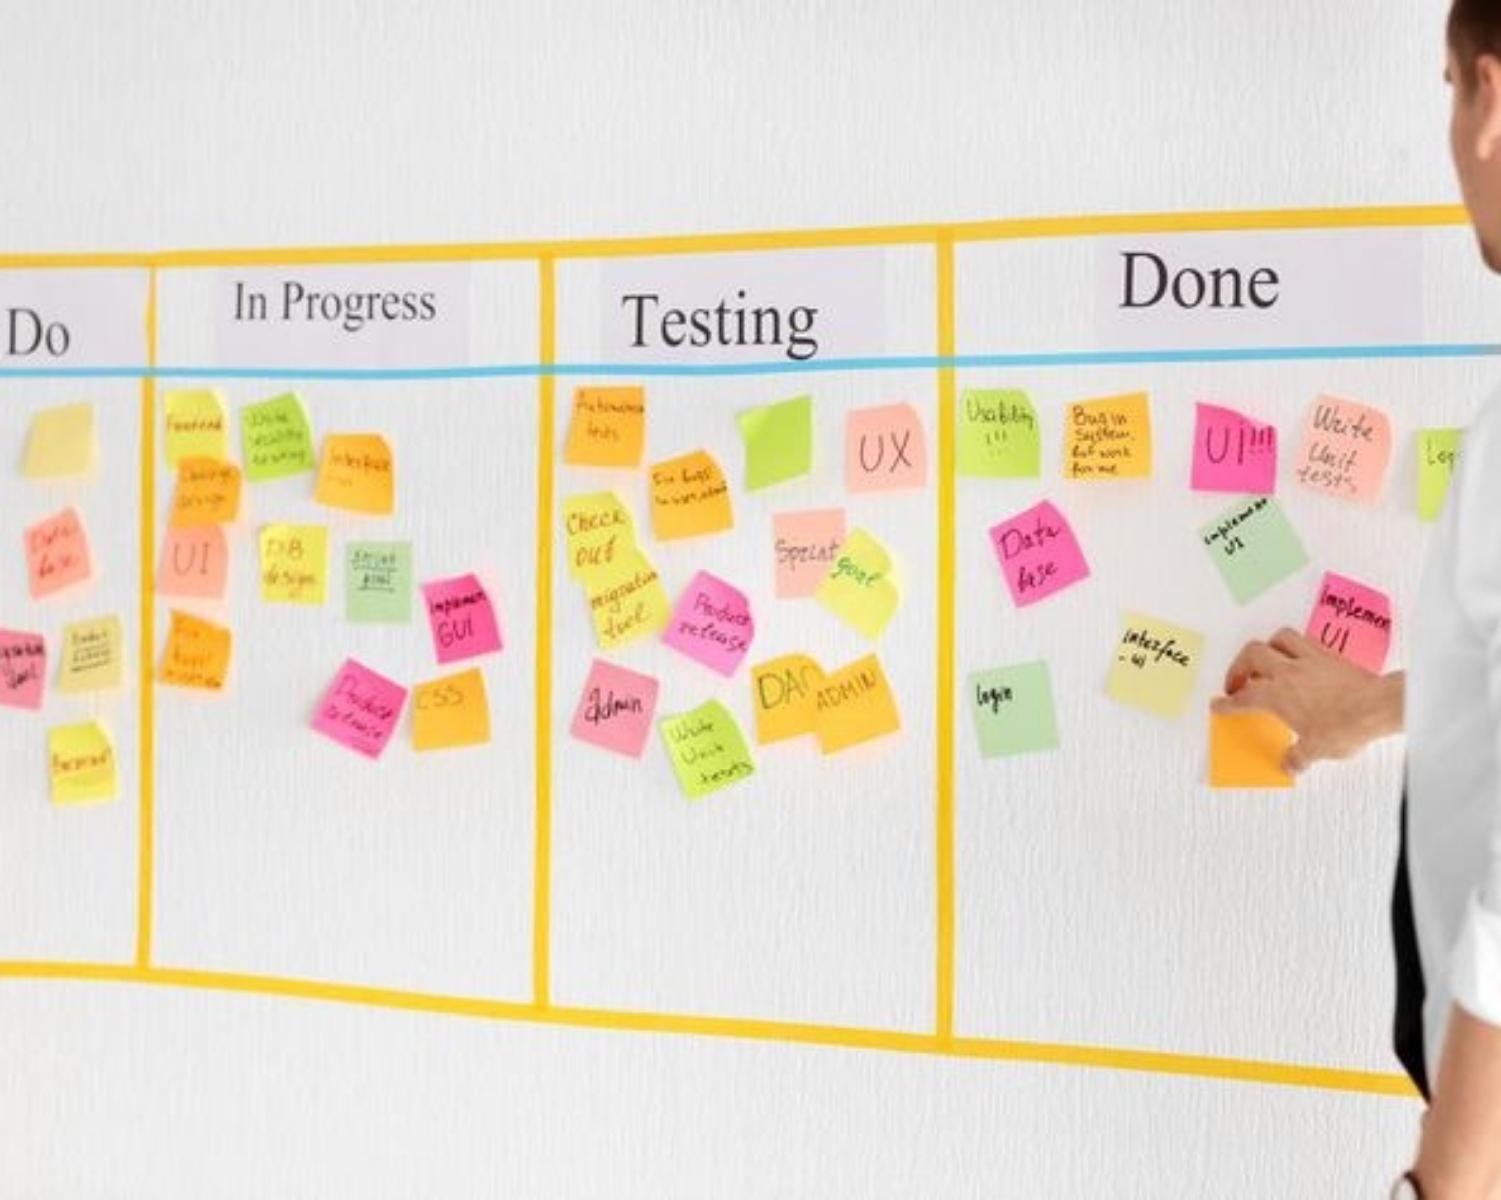 How to use Kanban?